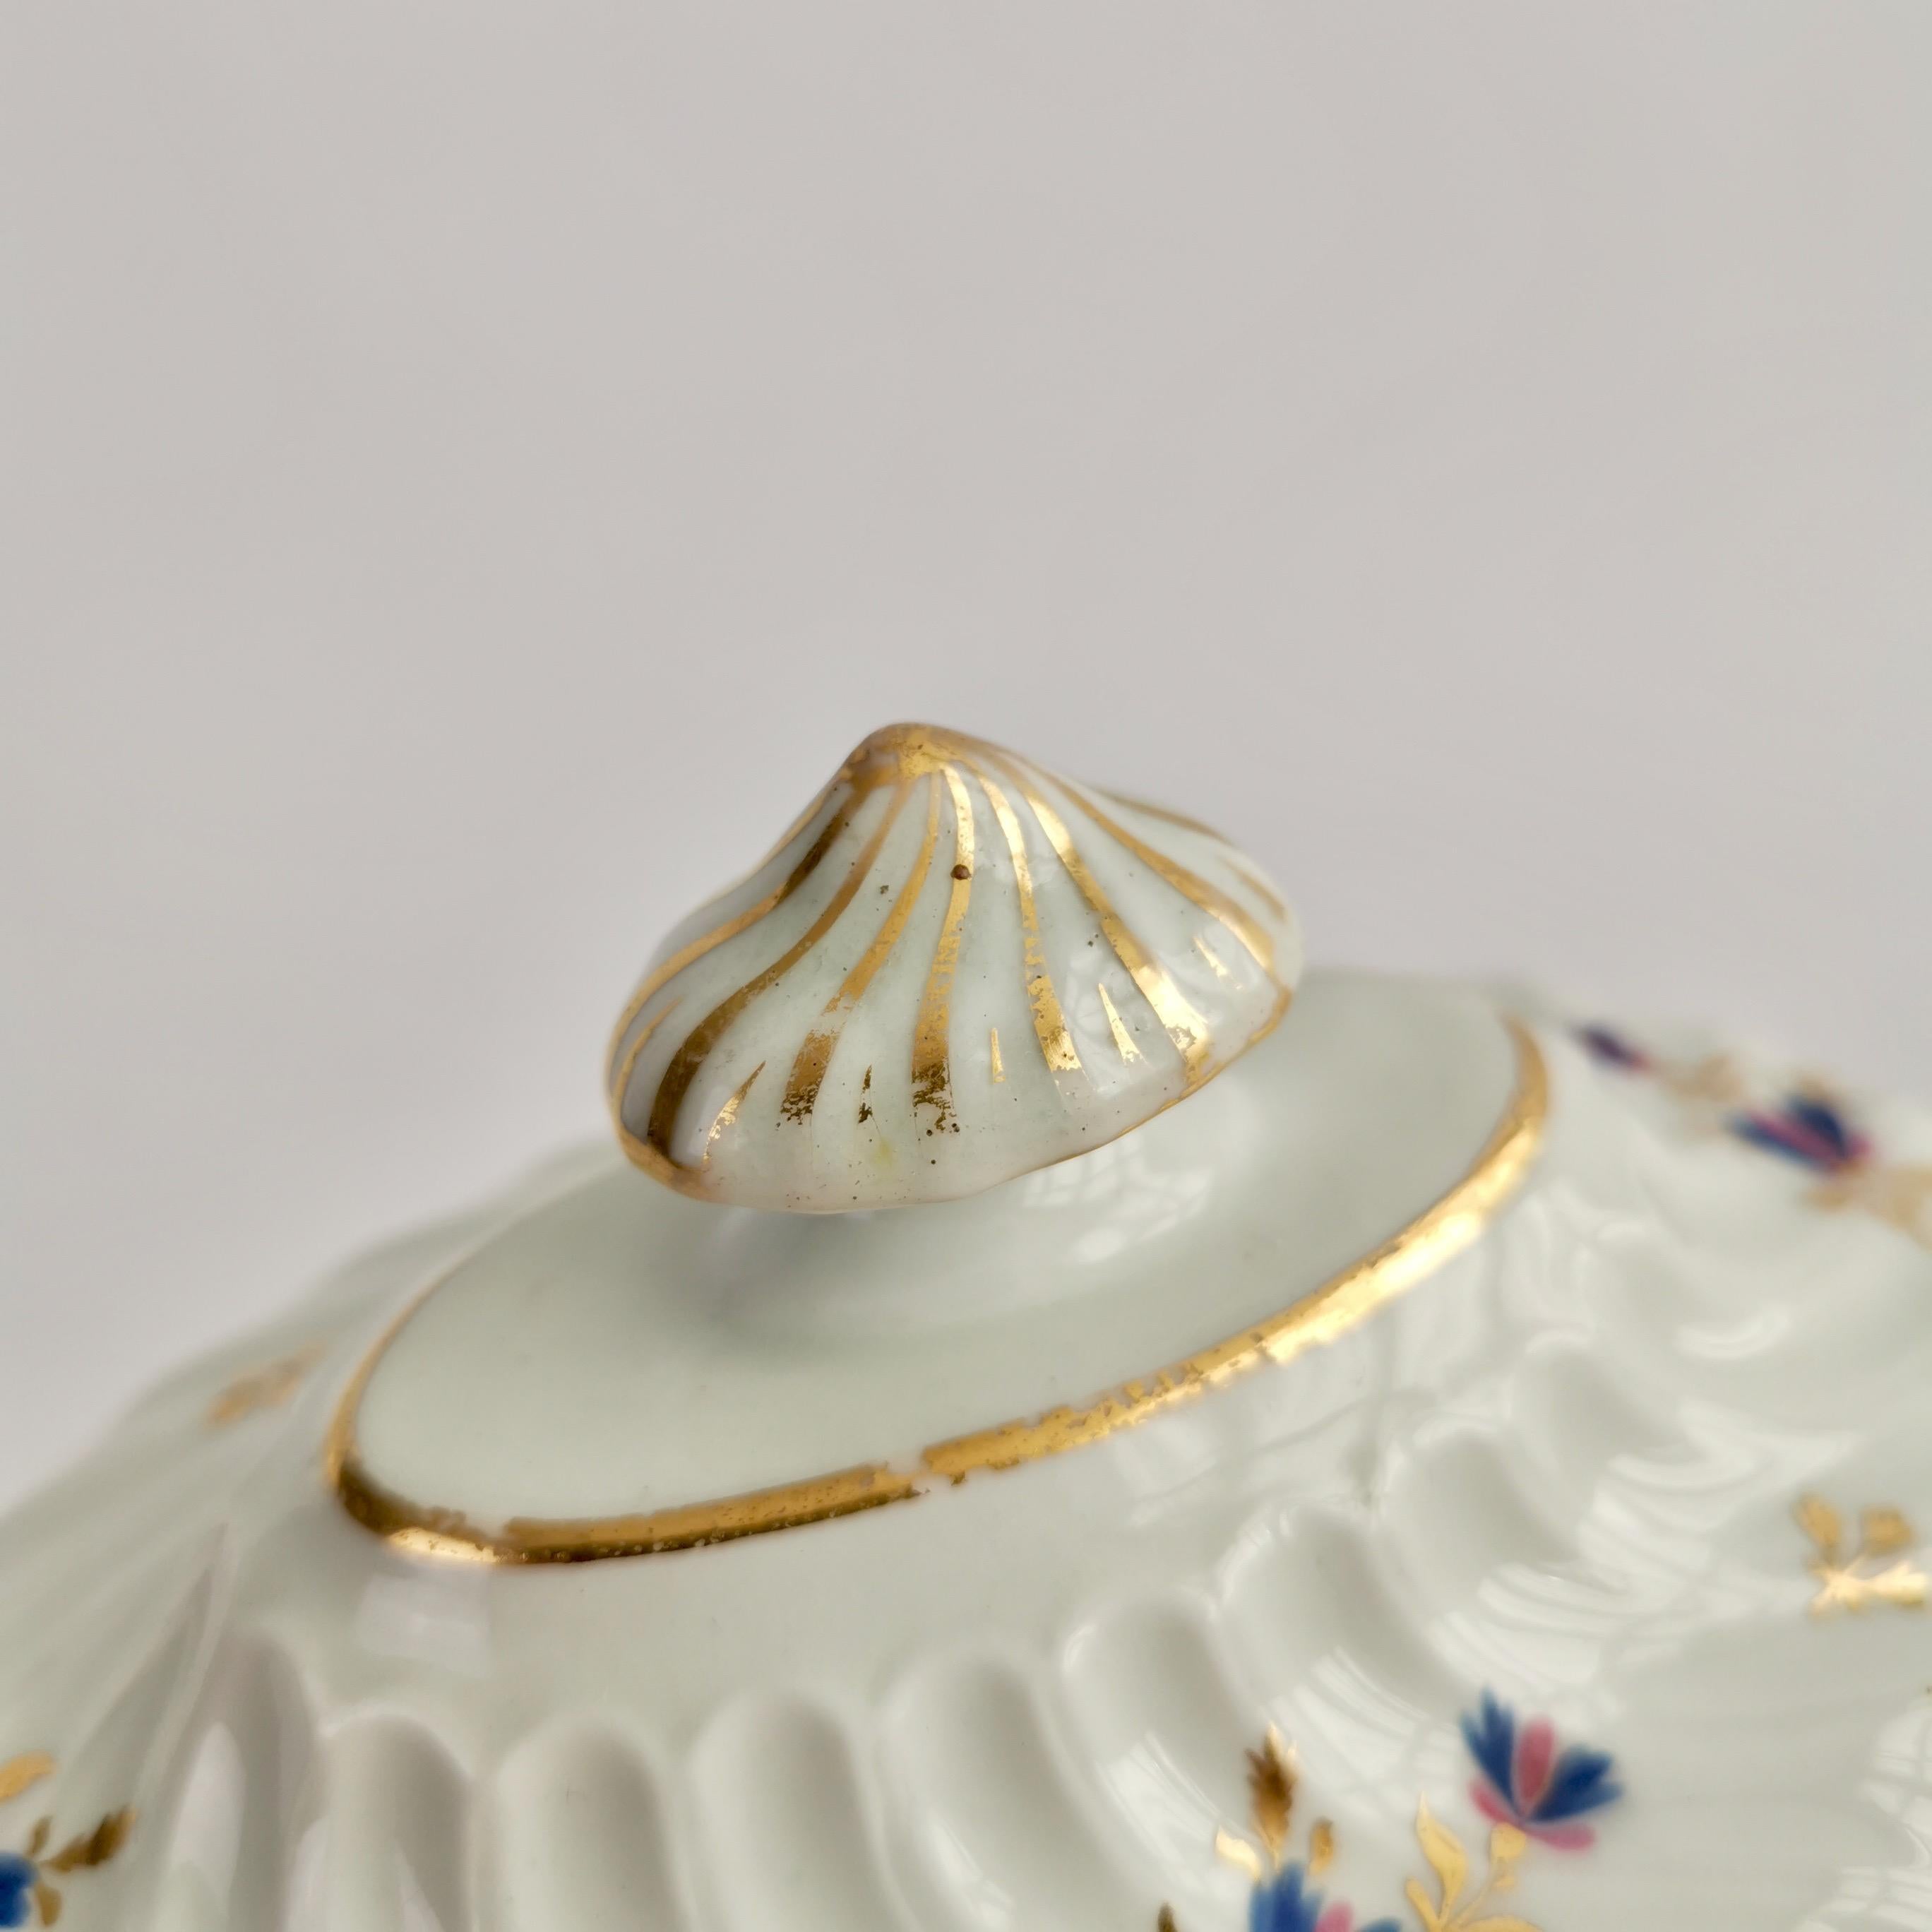 Hand-Painted Chamberlains Worcester Porcelain Sucrier, White and Ochre, Georgian, circa 1795